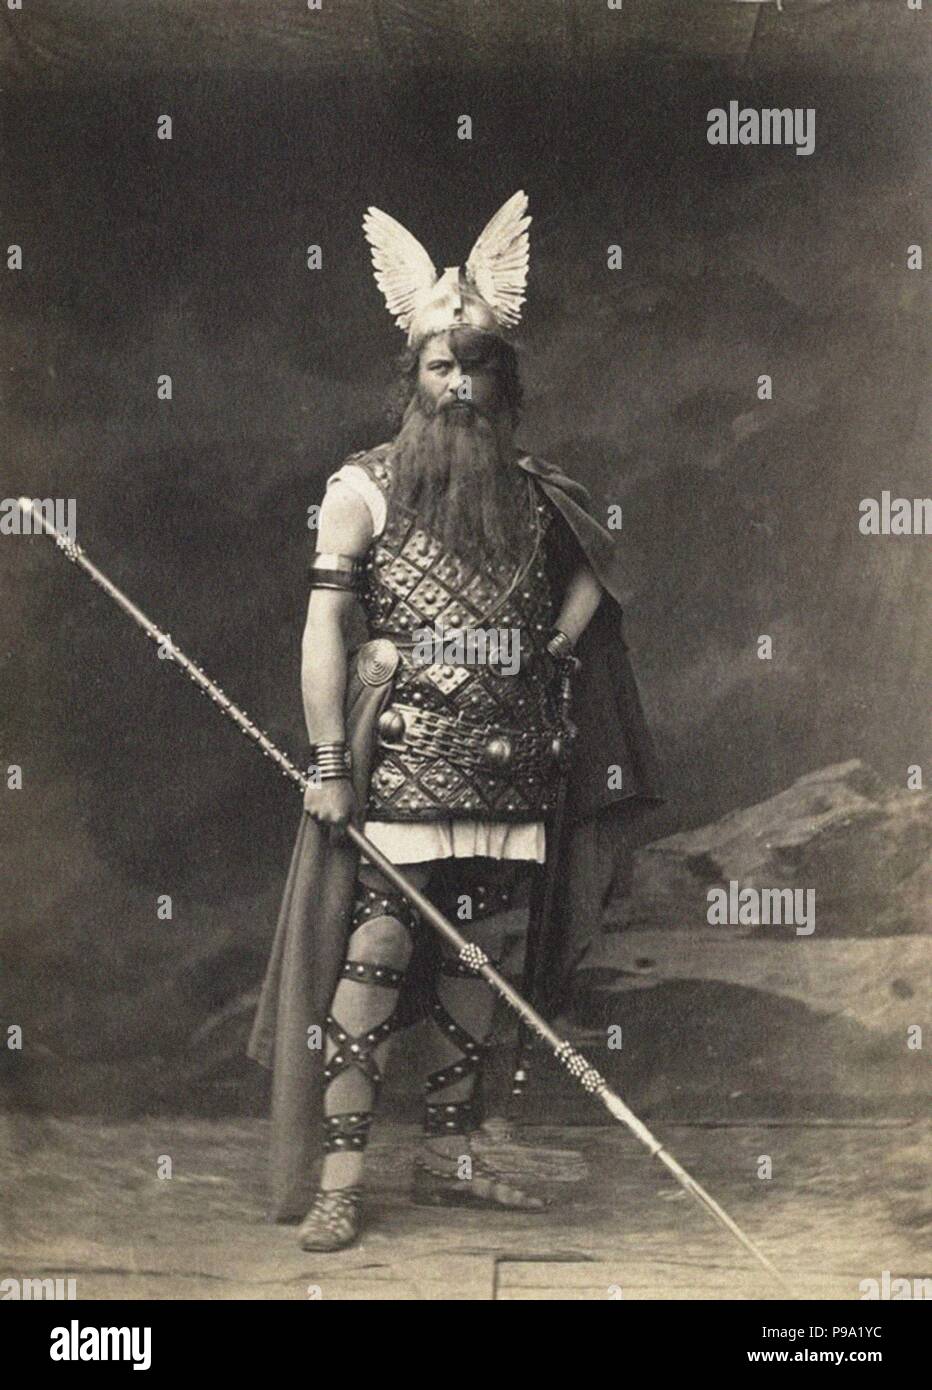 Franz Betz (1835-1900) as Wotan in Opera Der Ring des Nibelungen by Richard Wagner in Bayreuth. Museum: PRIVATE COLLECTION. Stock Photo